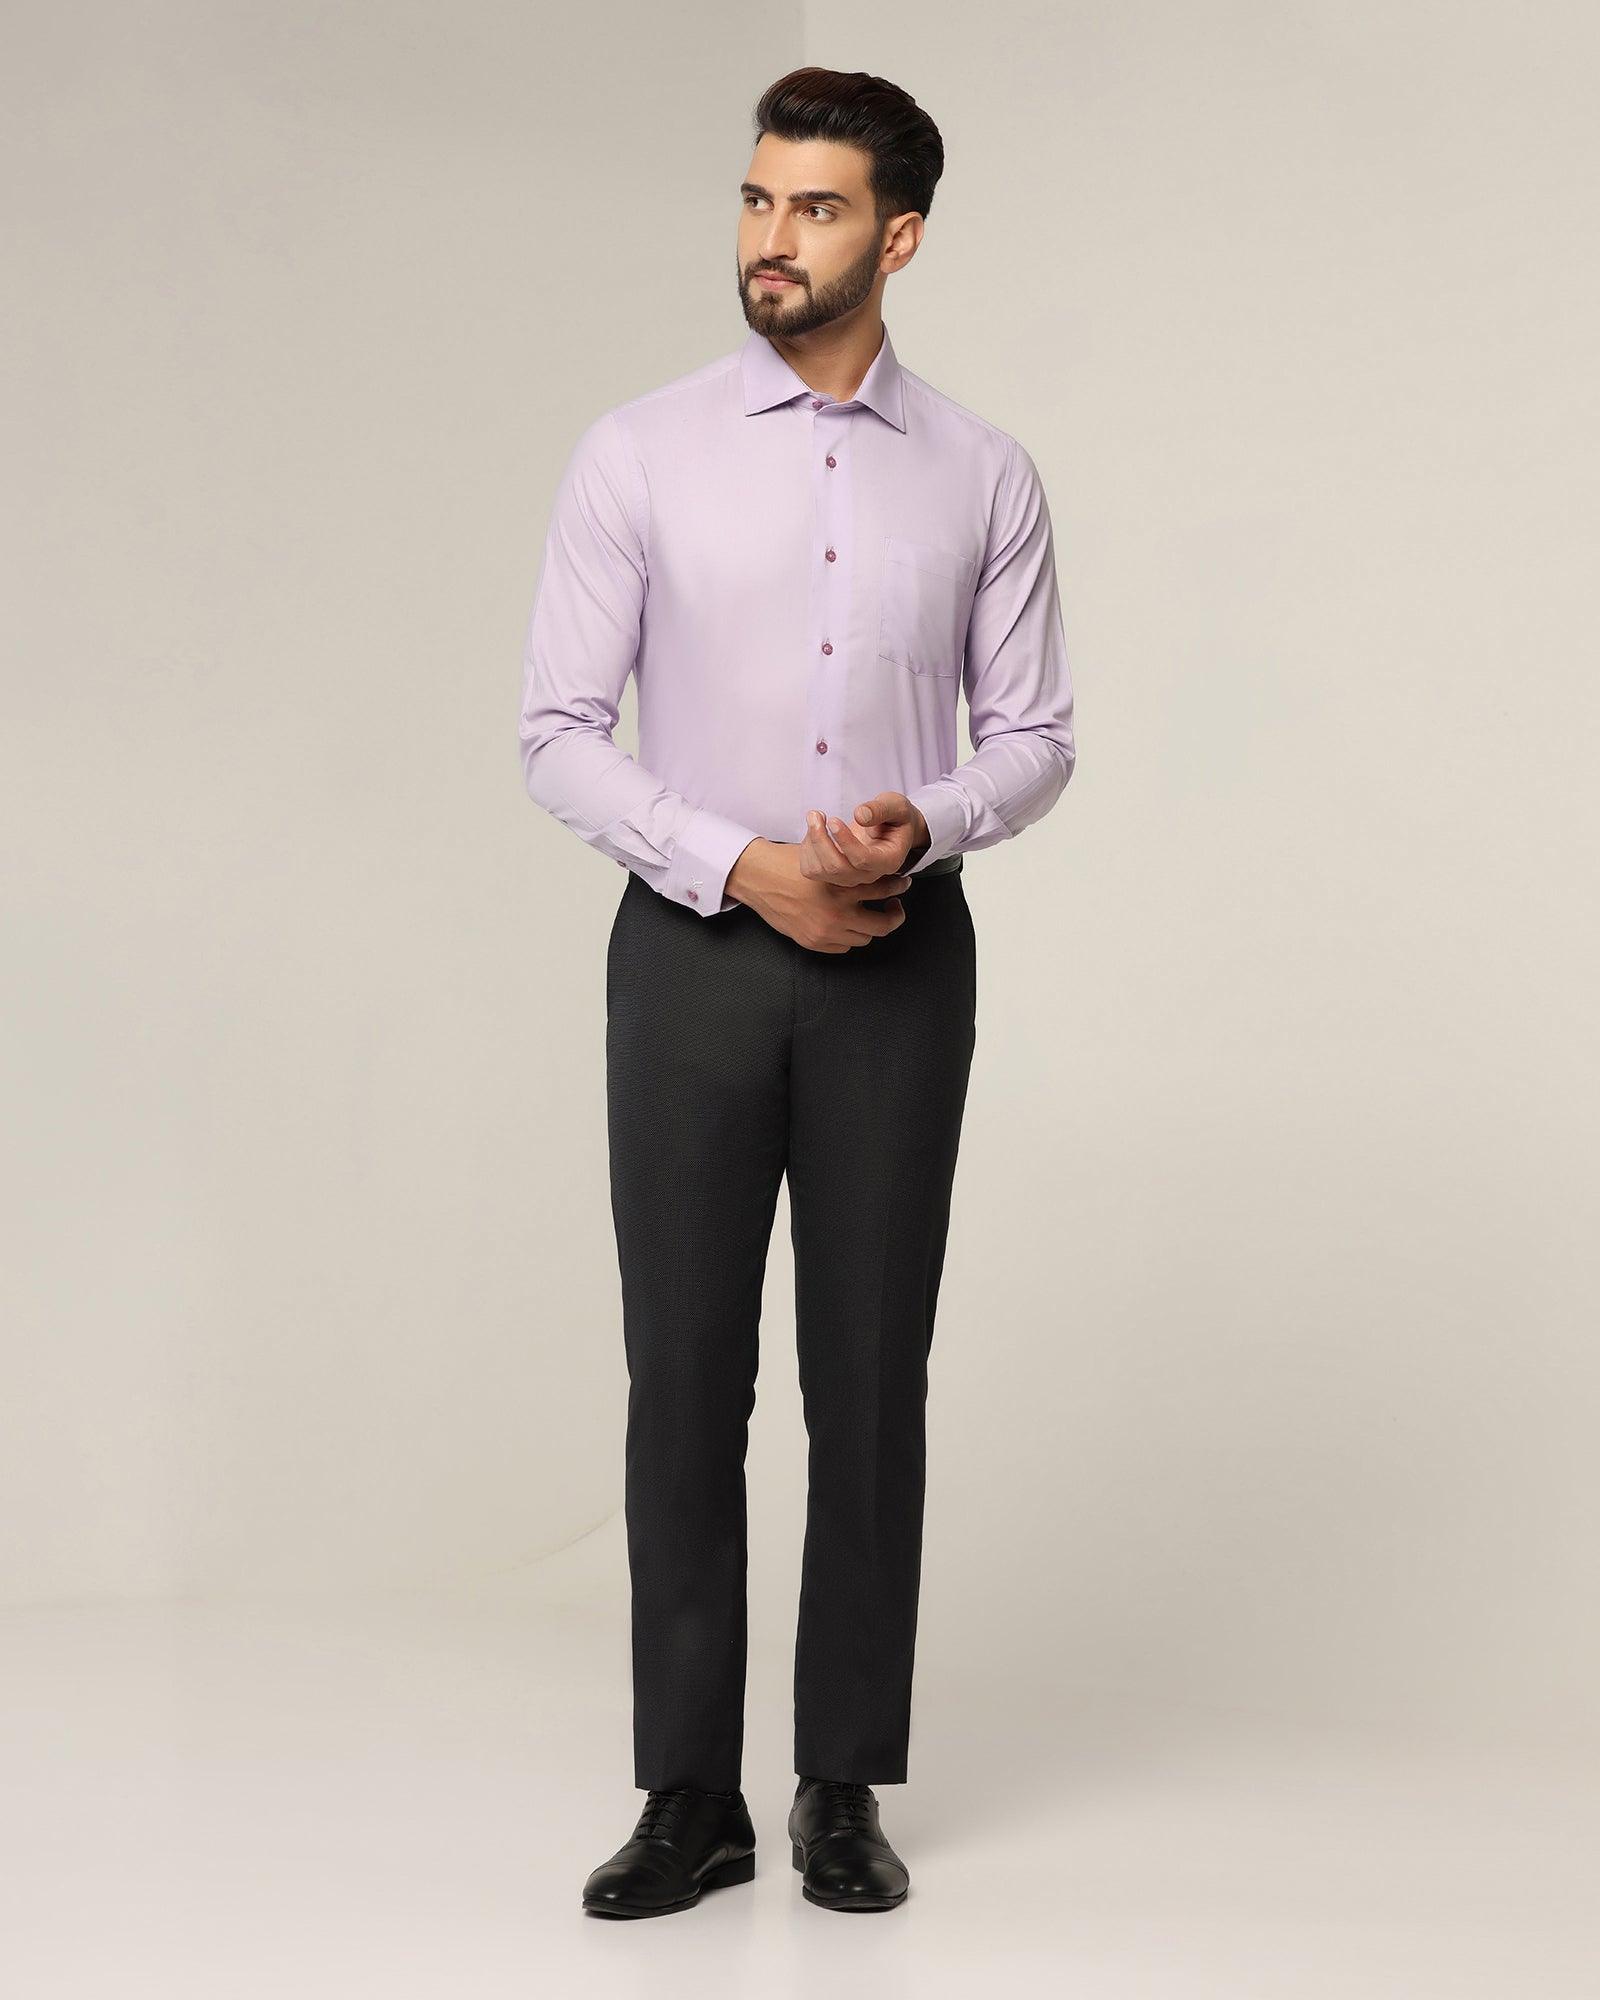 Otto Nagercoil | Otto Showroom Nagercoil | Gents Shirts, Trousers